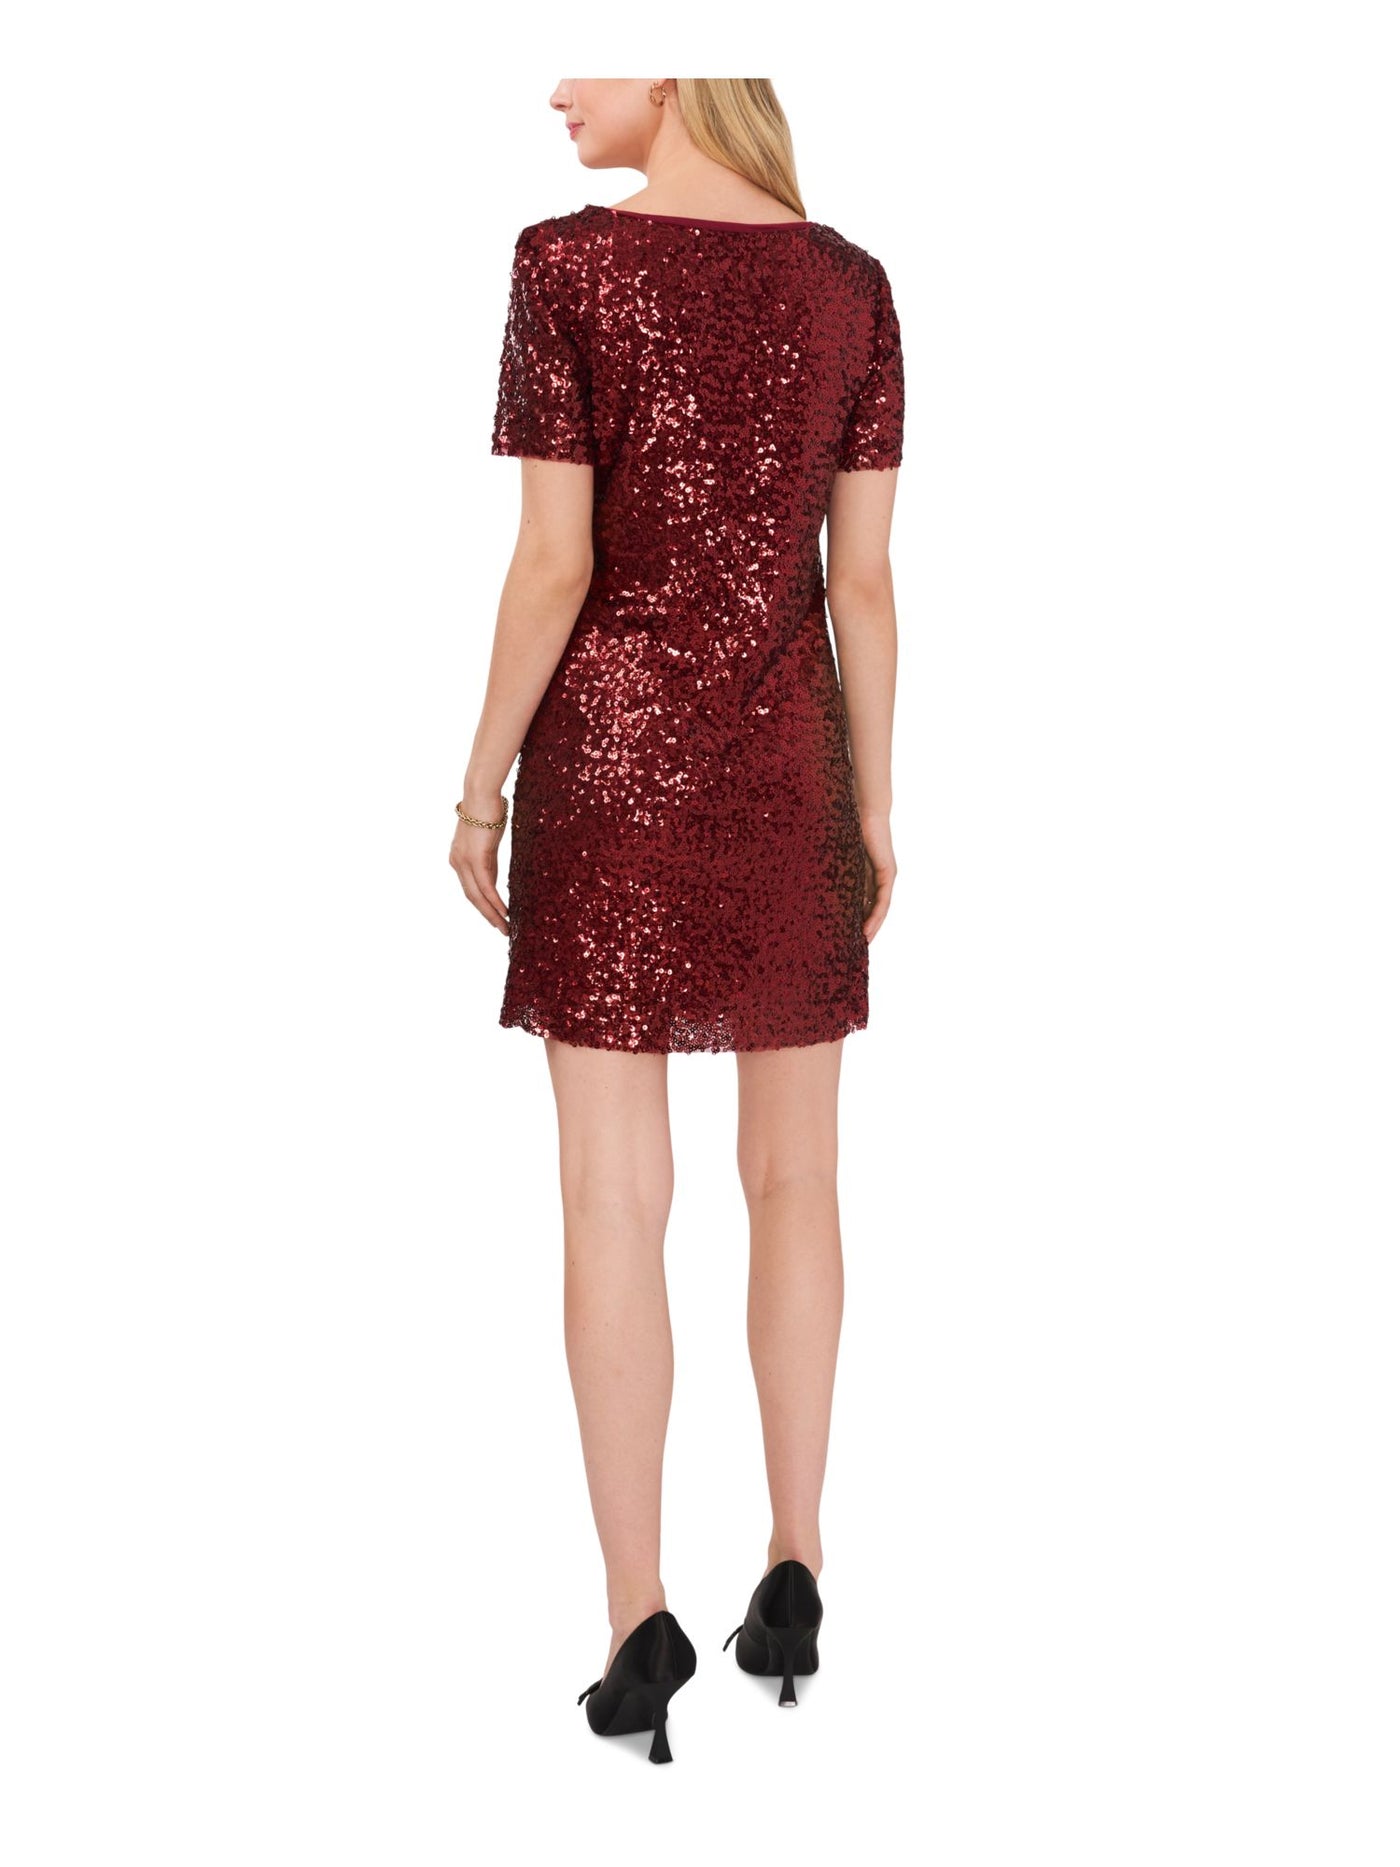 VINCE CAMUTO Womens Maroon Sequined Short Sleeve Round Neck Above The Knee Party Shift Dress XS